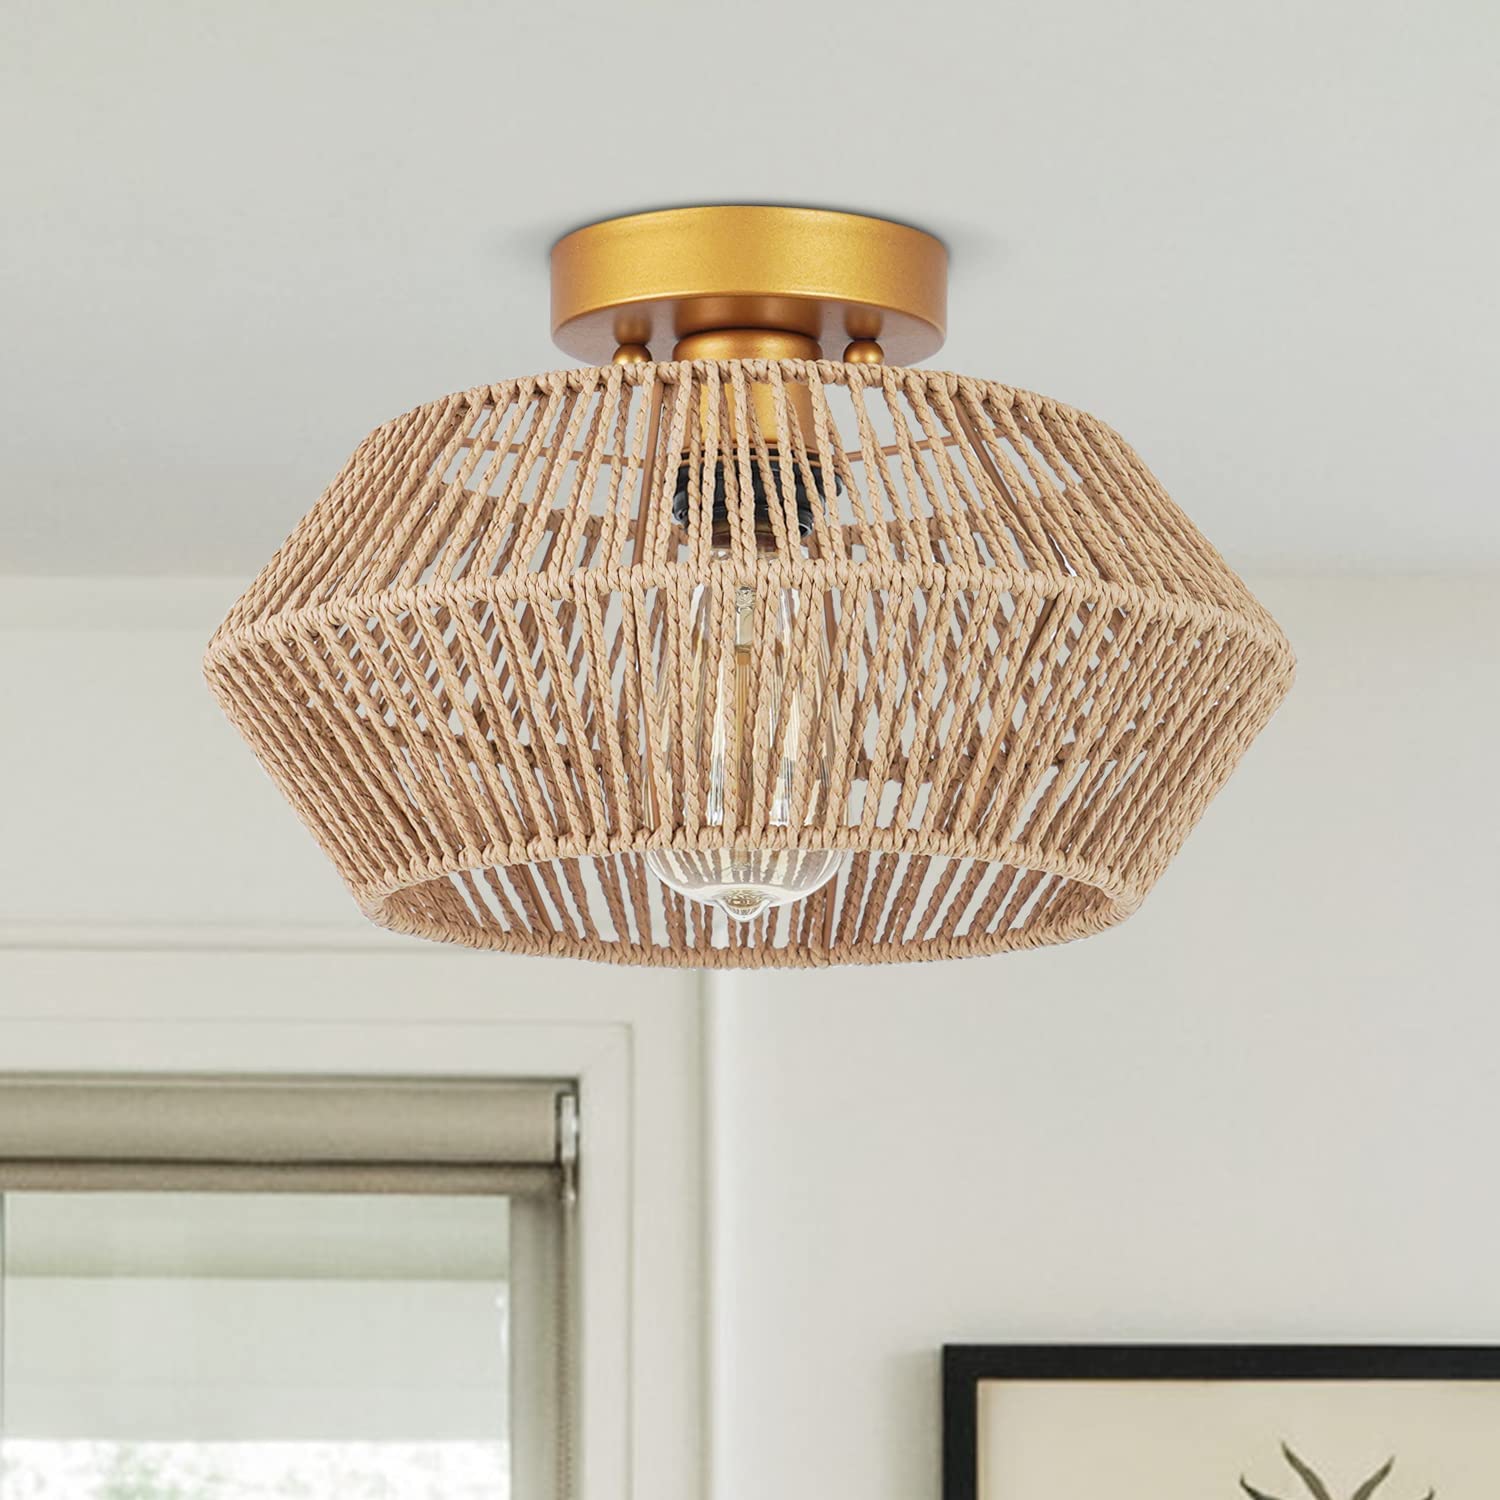 Stylish & Minimalistic Rattan Ceiling Light - Eco-Friendly & Sustainable Woven Pendant for Modern Home Decor